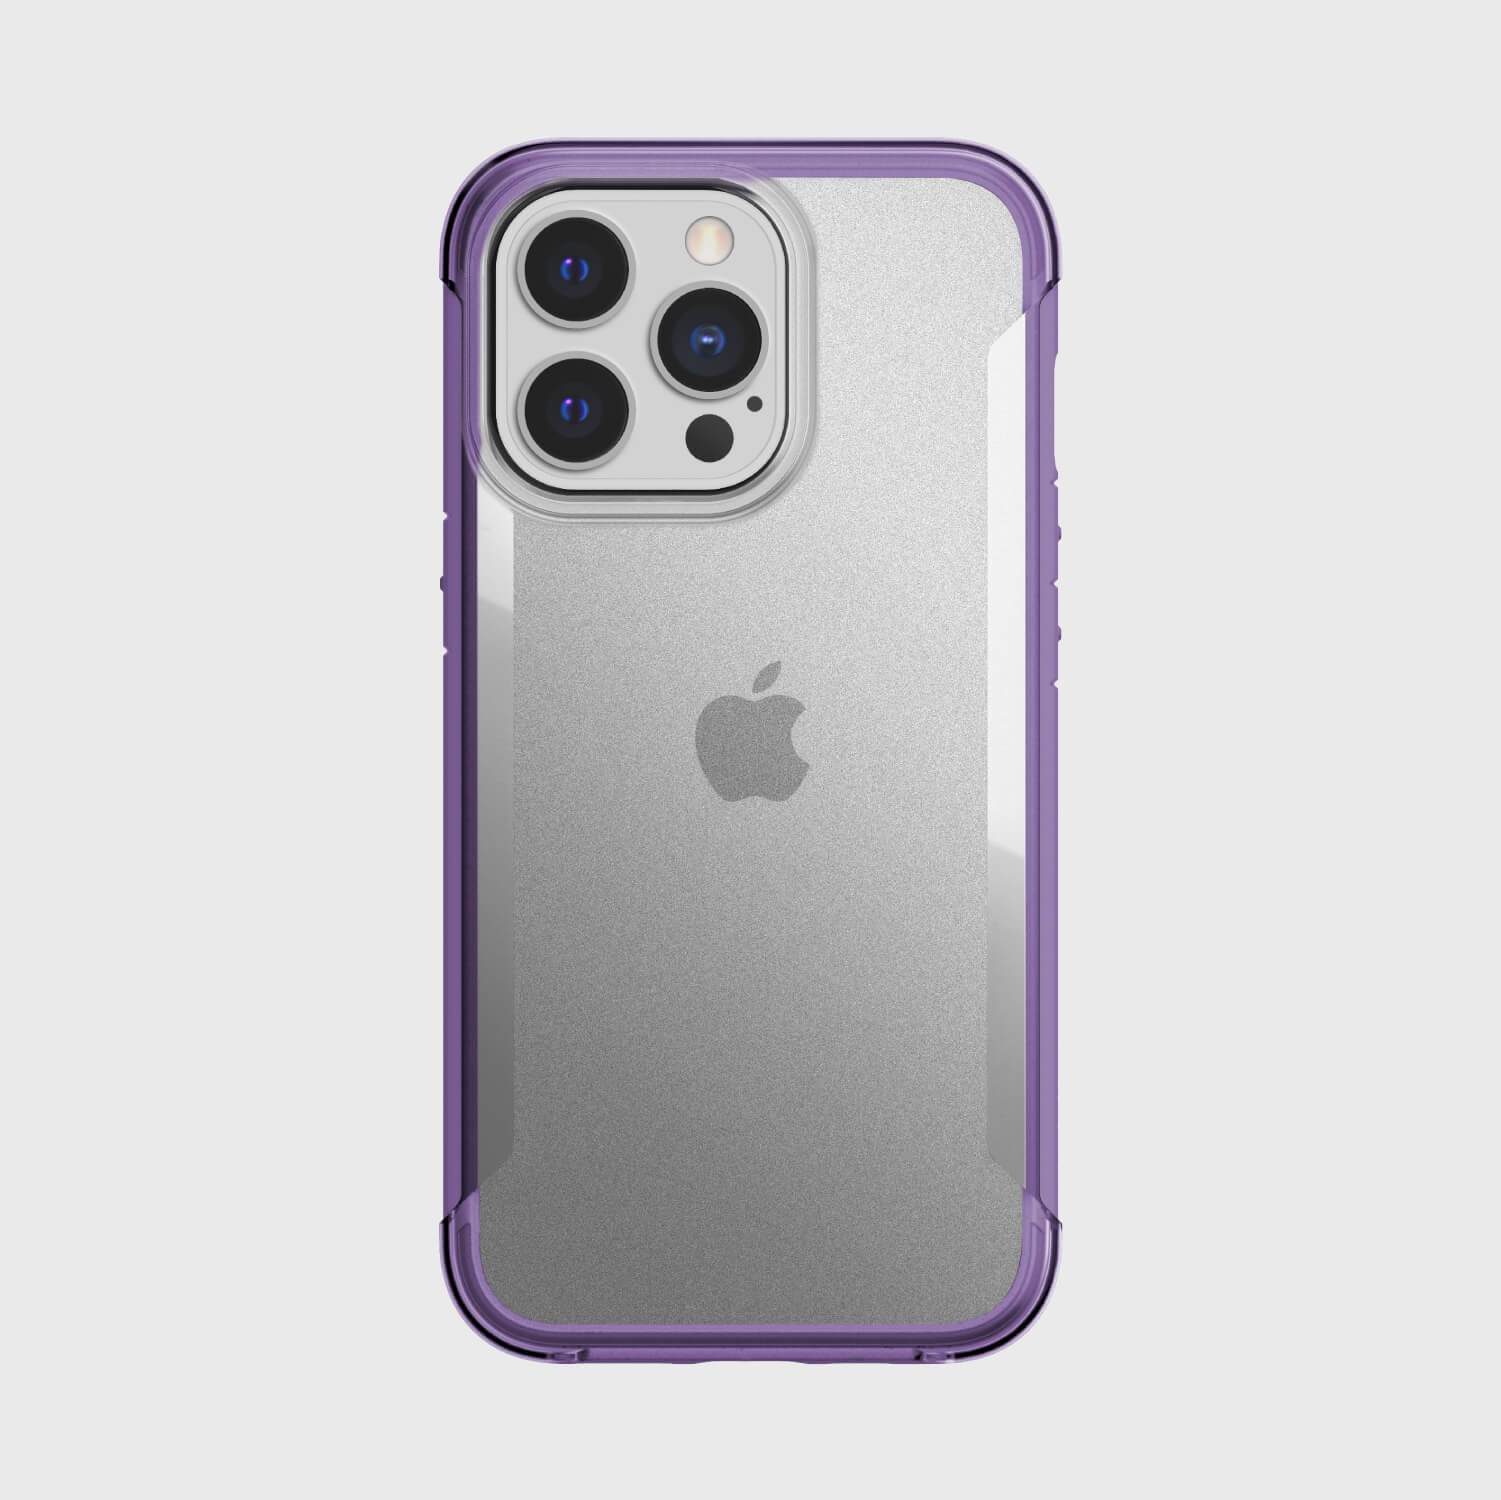 The eco-friendly back view of an iPhone 13 Pro Max Case - TERRAIN in purple by Raptic.